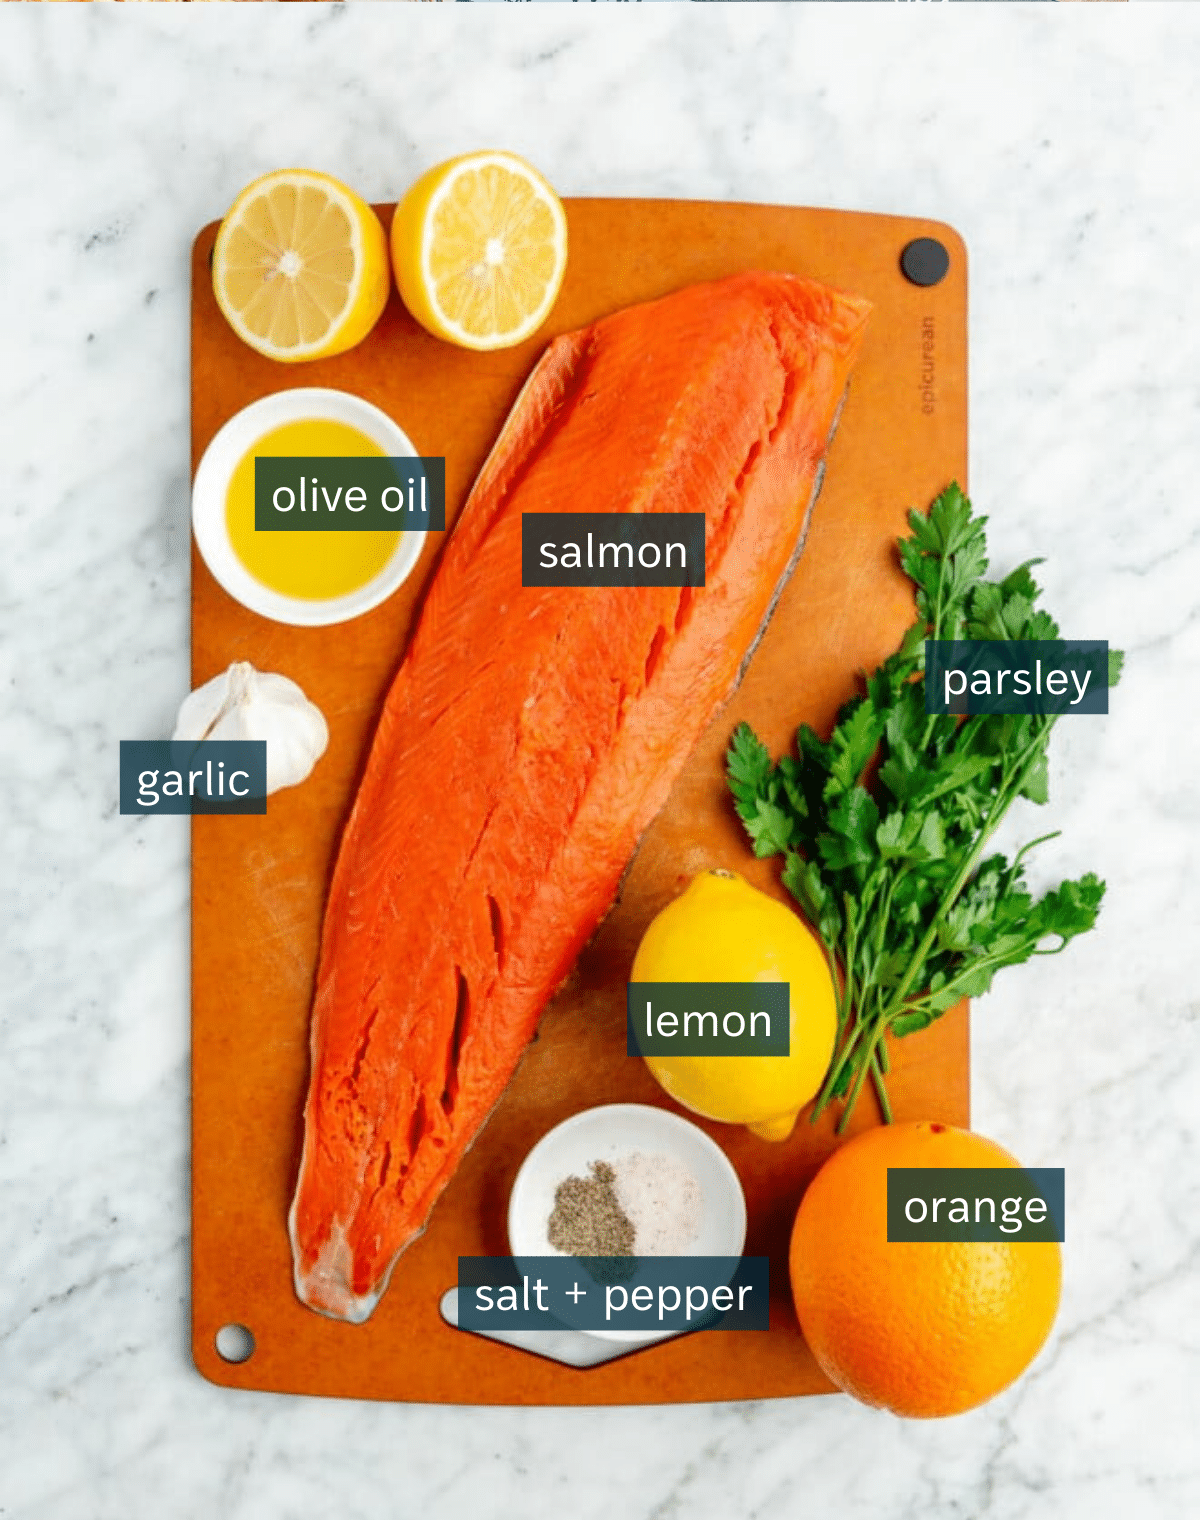 Ingredients for easy citrus roasted salmon sit on an orange cutting board which sits on a marble countertop.